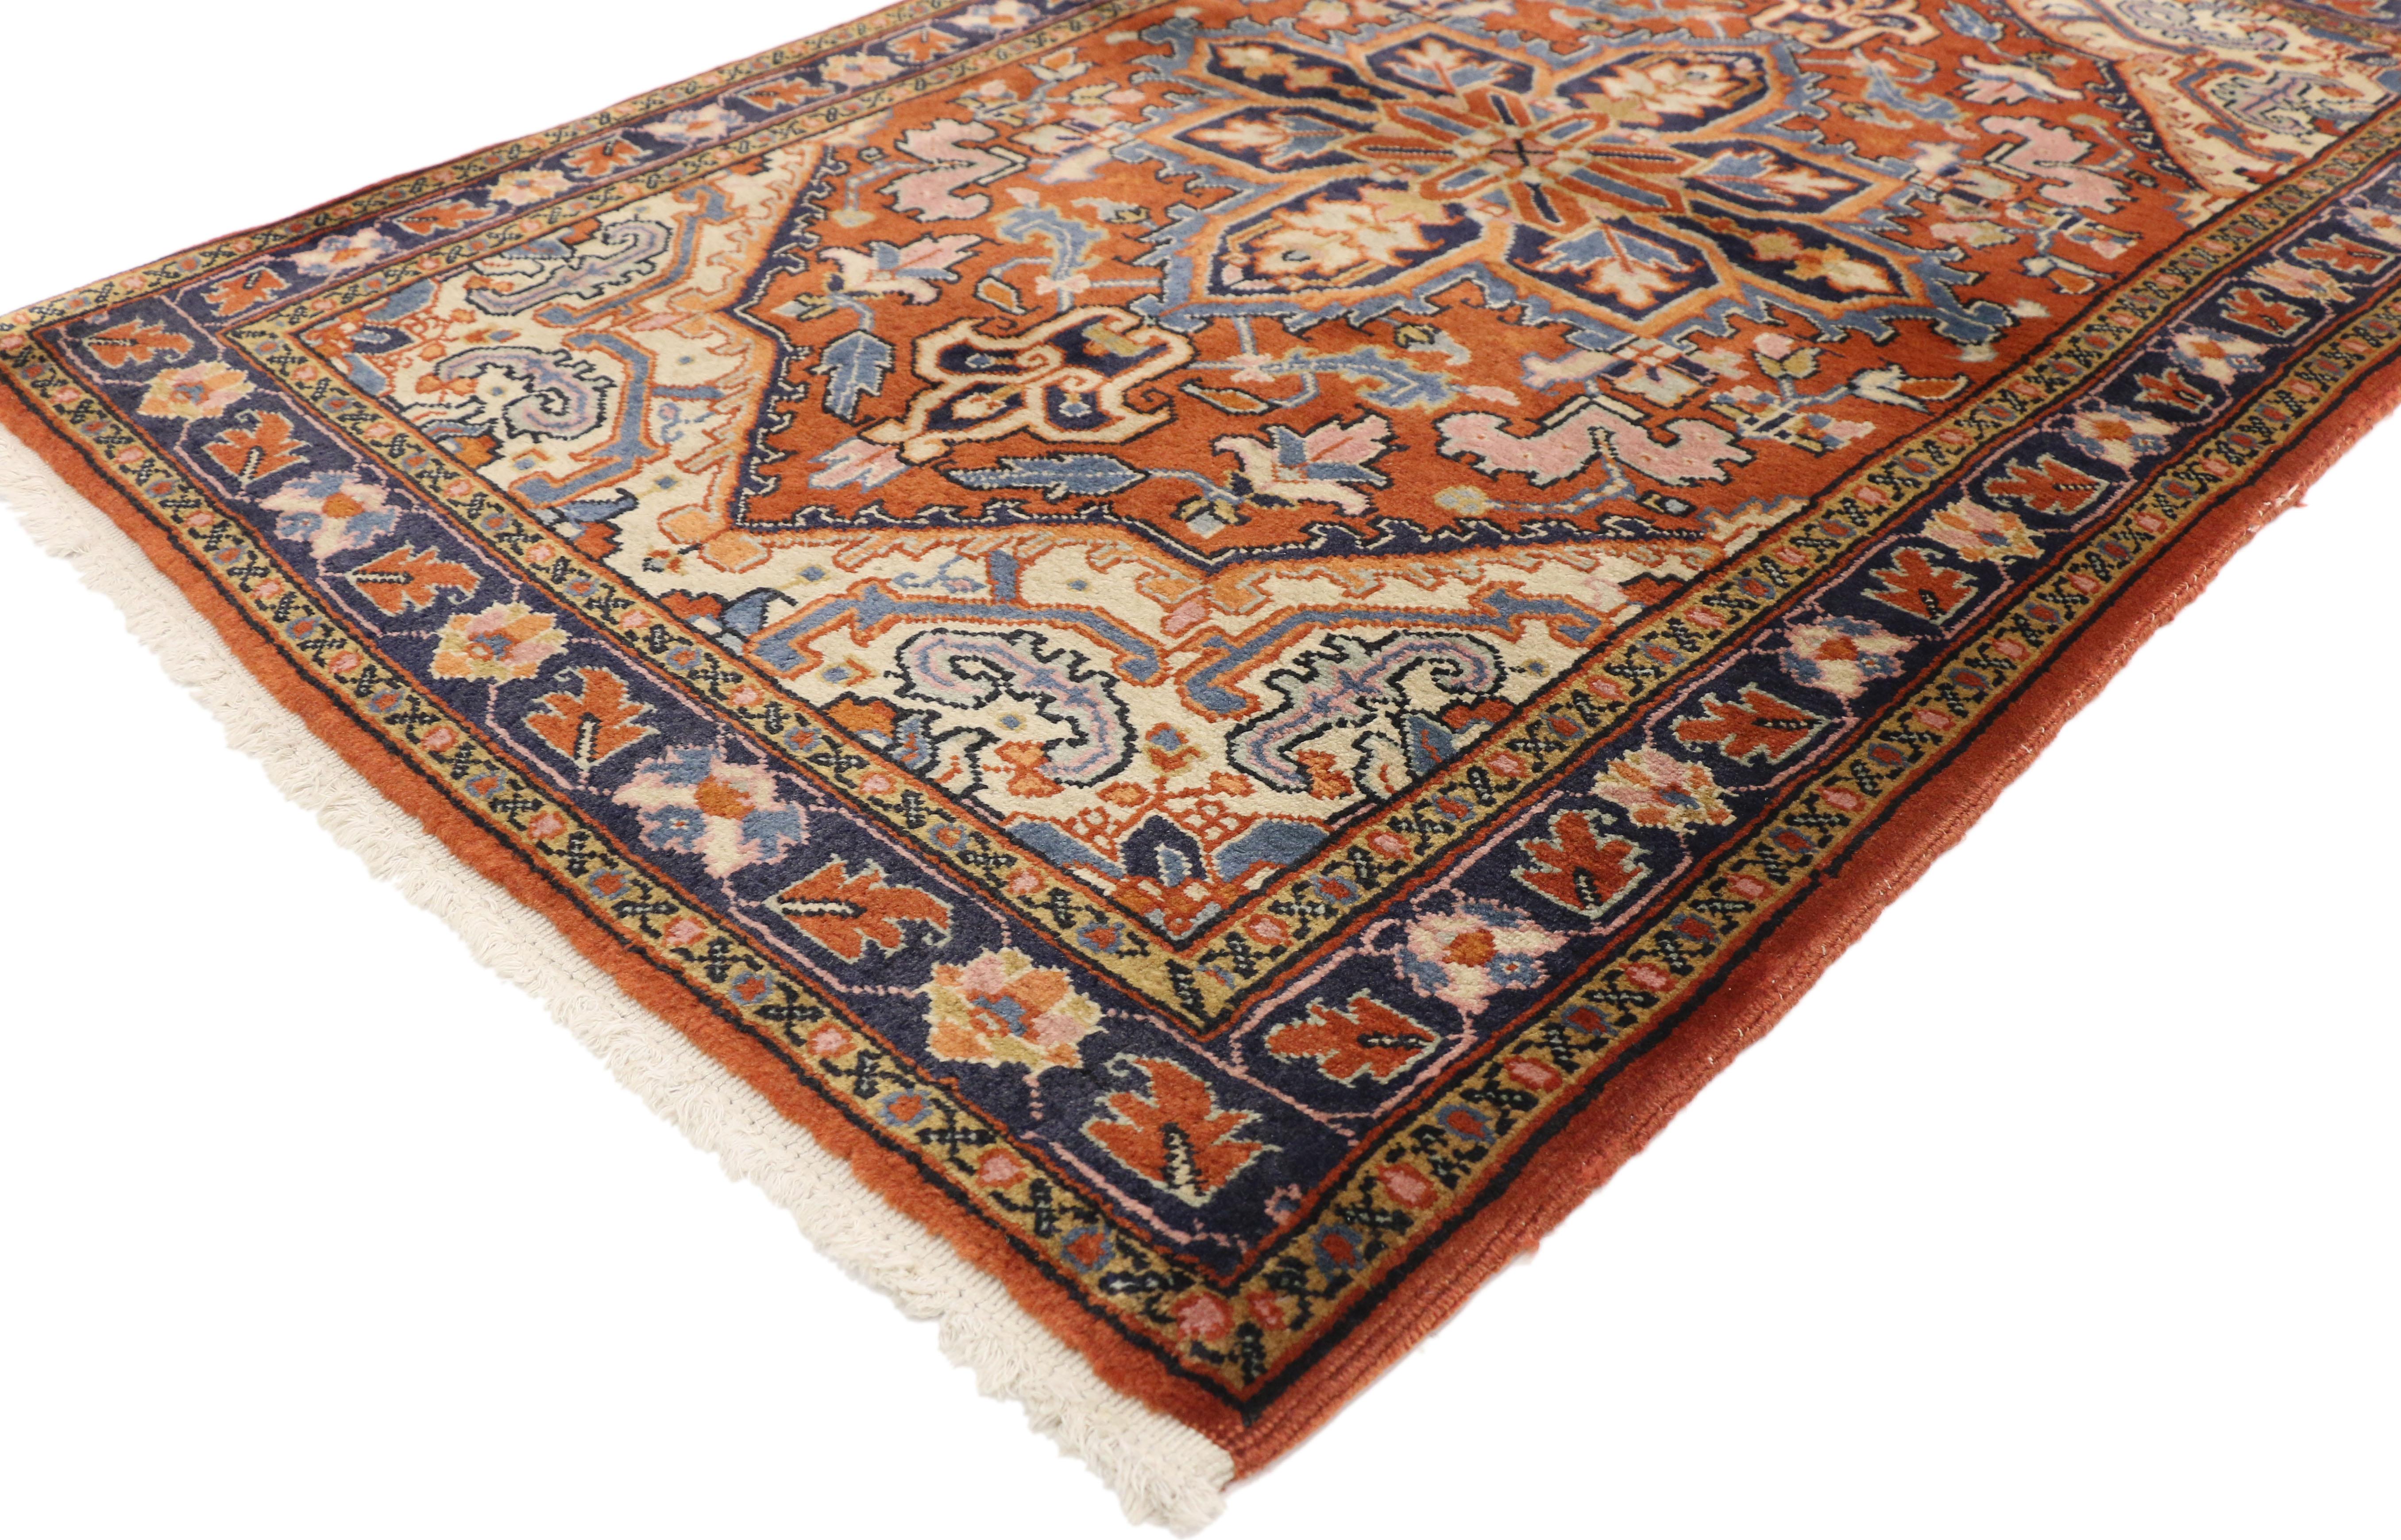 75996, vintage Persian Heriz rug with Rustic Federal style. Traditional and regal with brilliant color, this vintage Persian Heriz accent rug with Rustic Federal style is comprised of a prominent octagram medallion anchored with palmette finials.